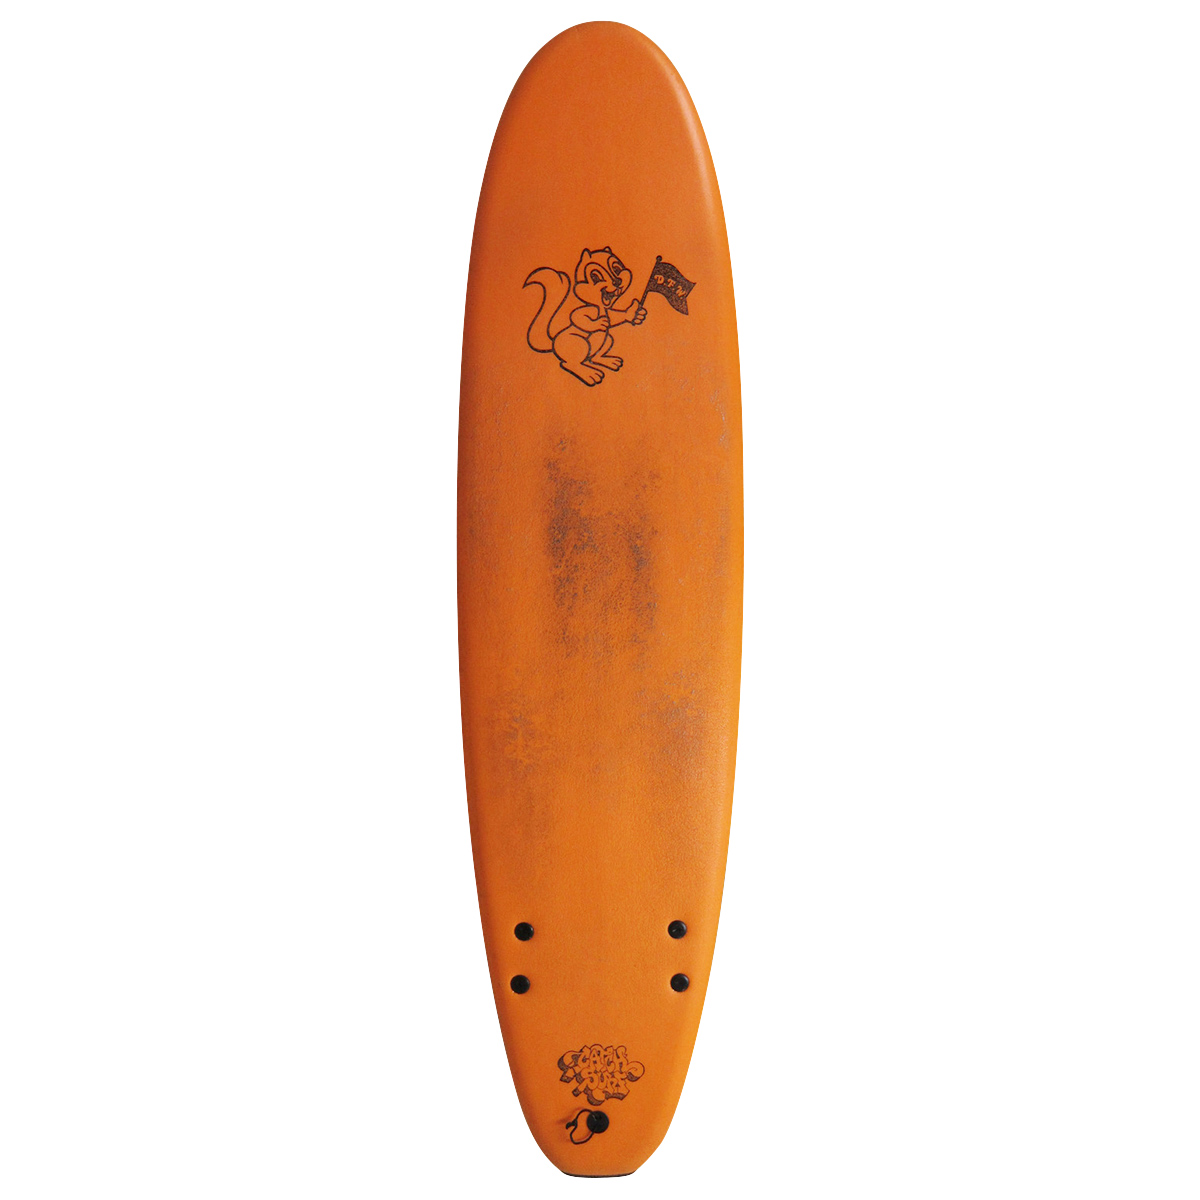 CATCH SURF / BARRY MCGEE DFW EDITION 7.0 SIDE BITE FIN